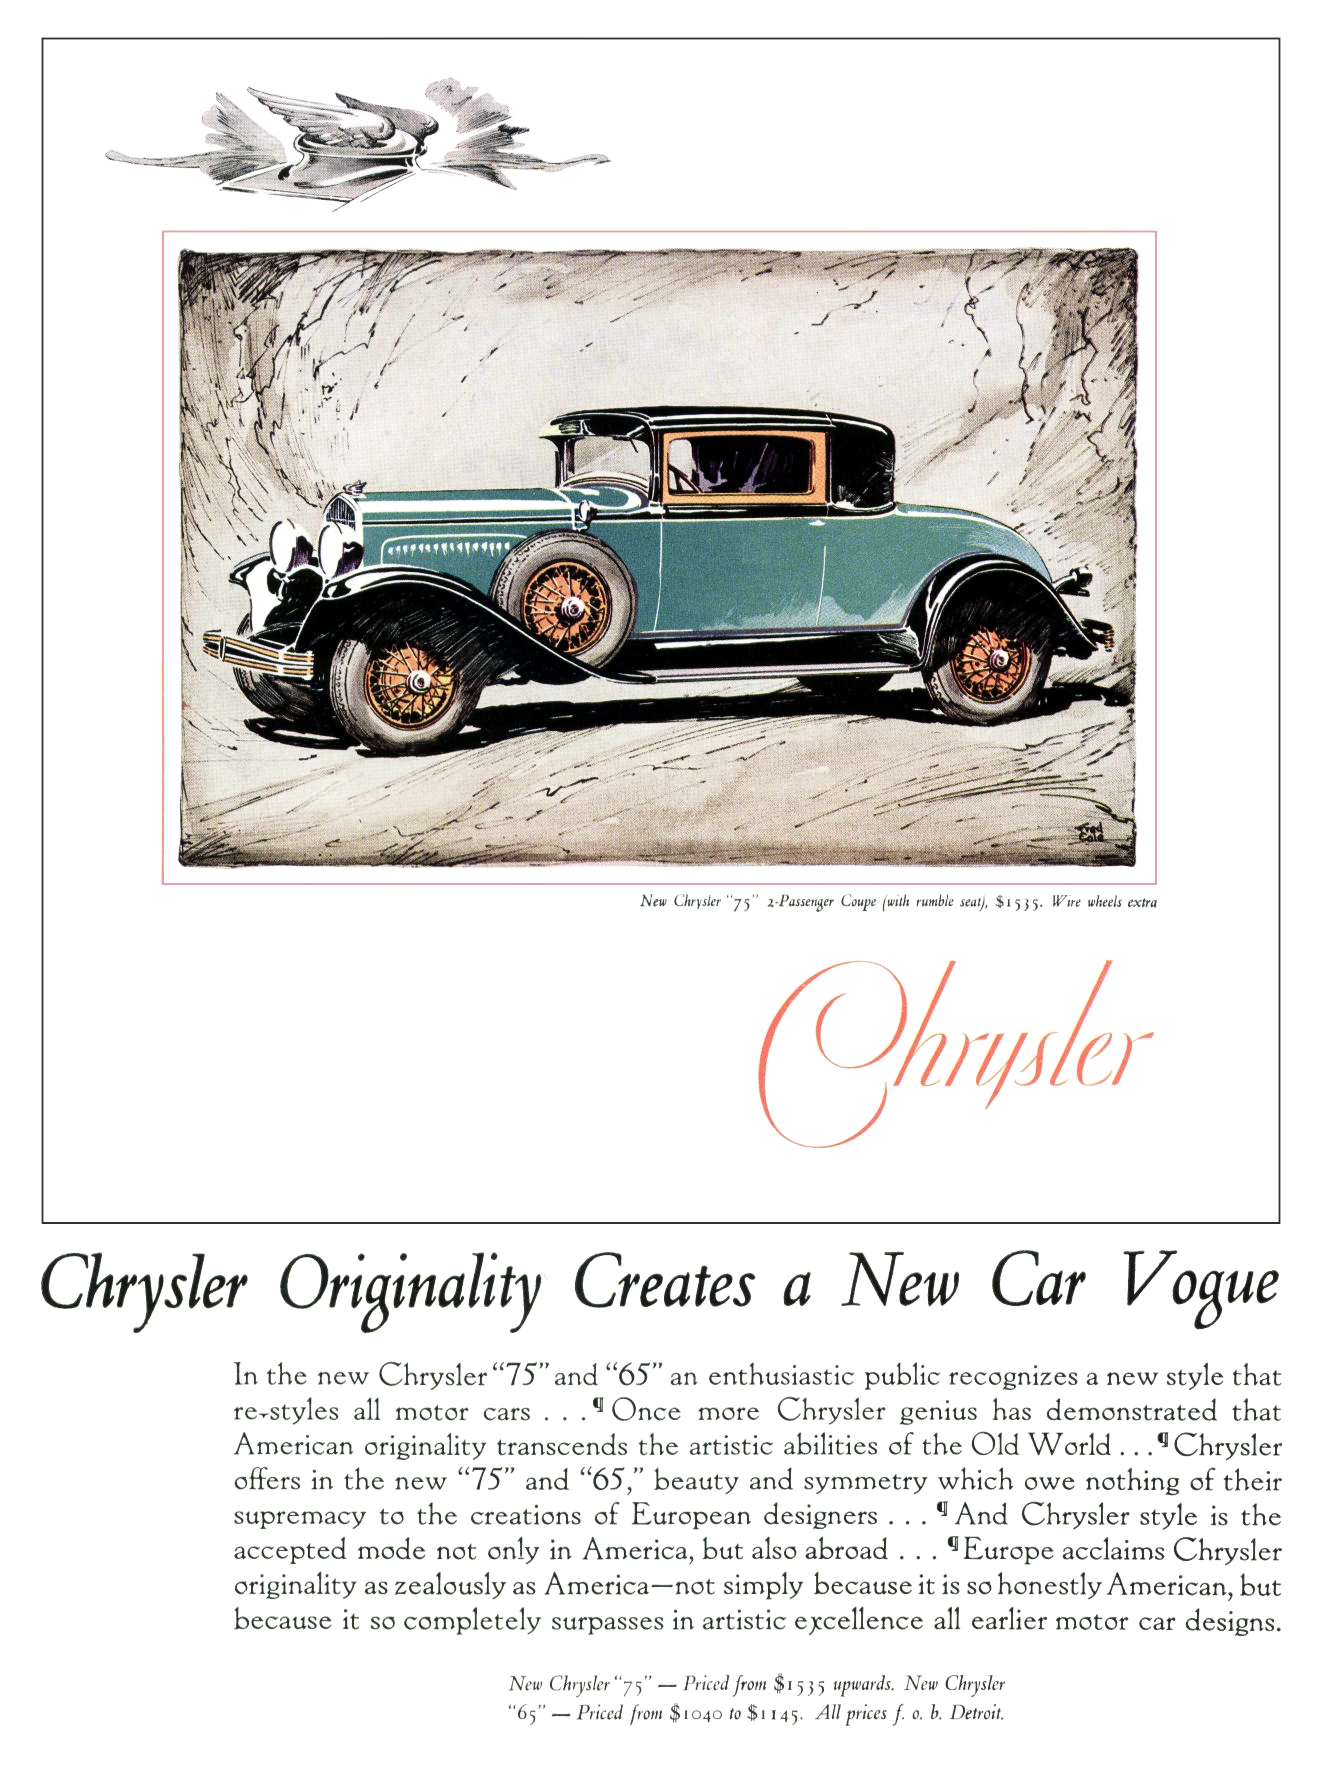 Chrysler "75" 2-Passenger Coupe Ad (November, 1928) - Illustrated by Fred Cole